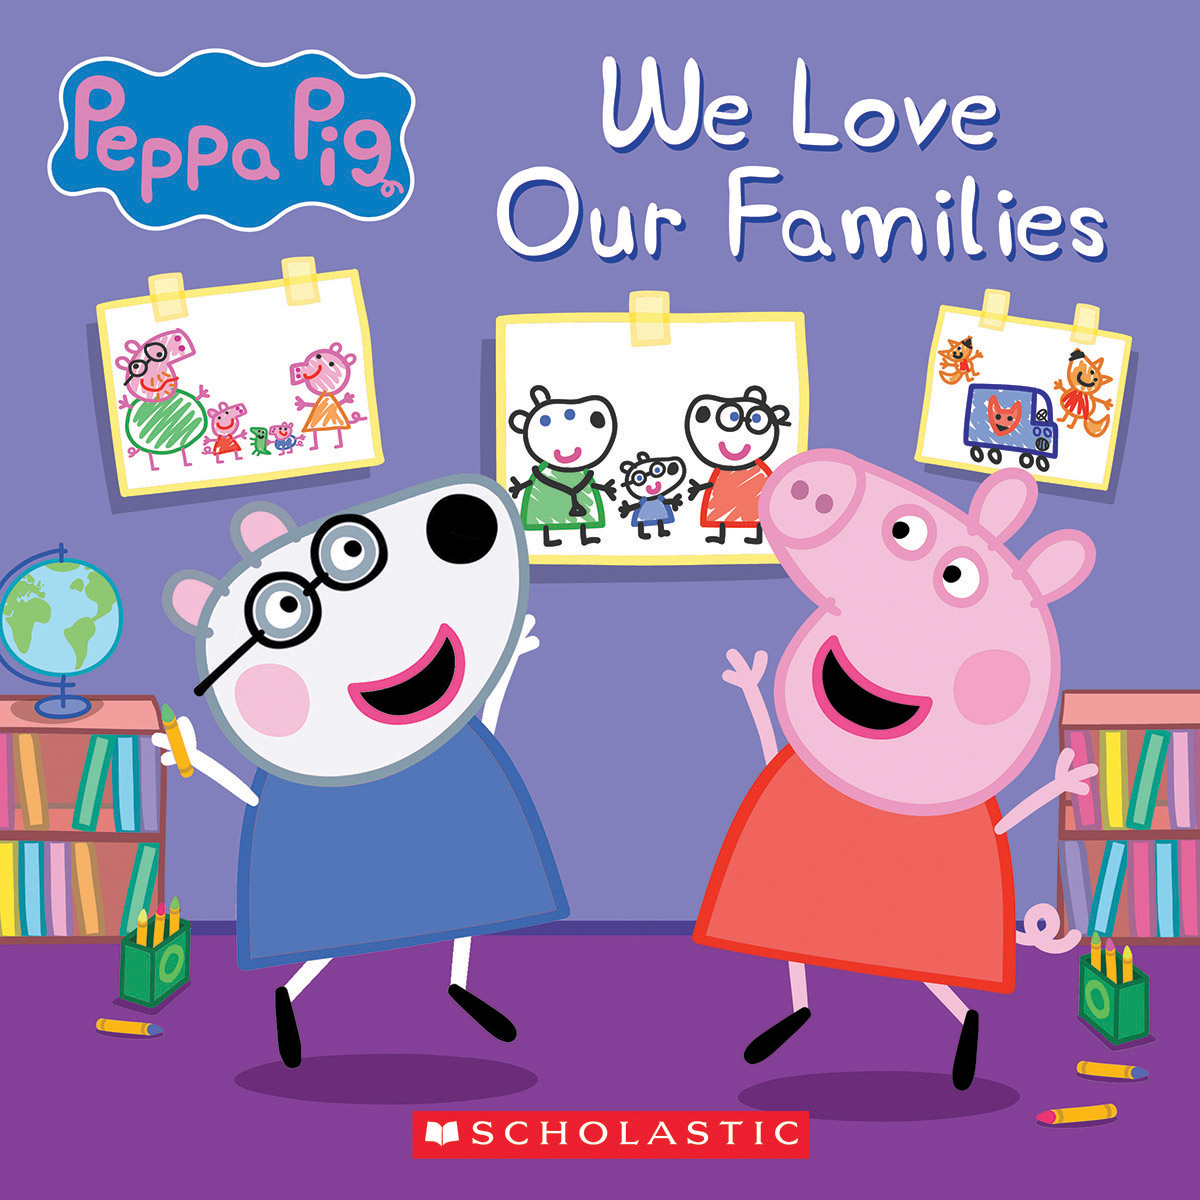  Peppa Pig: We Love Our Families 